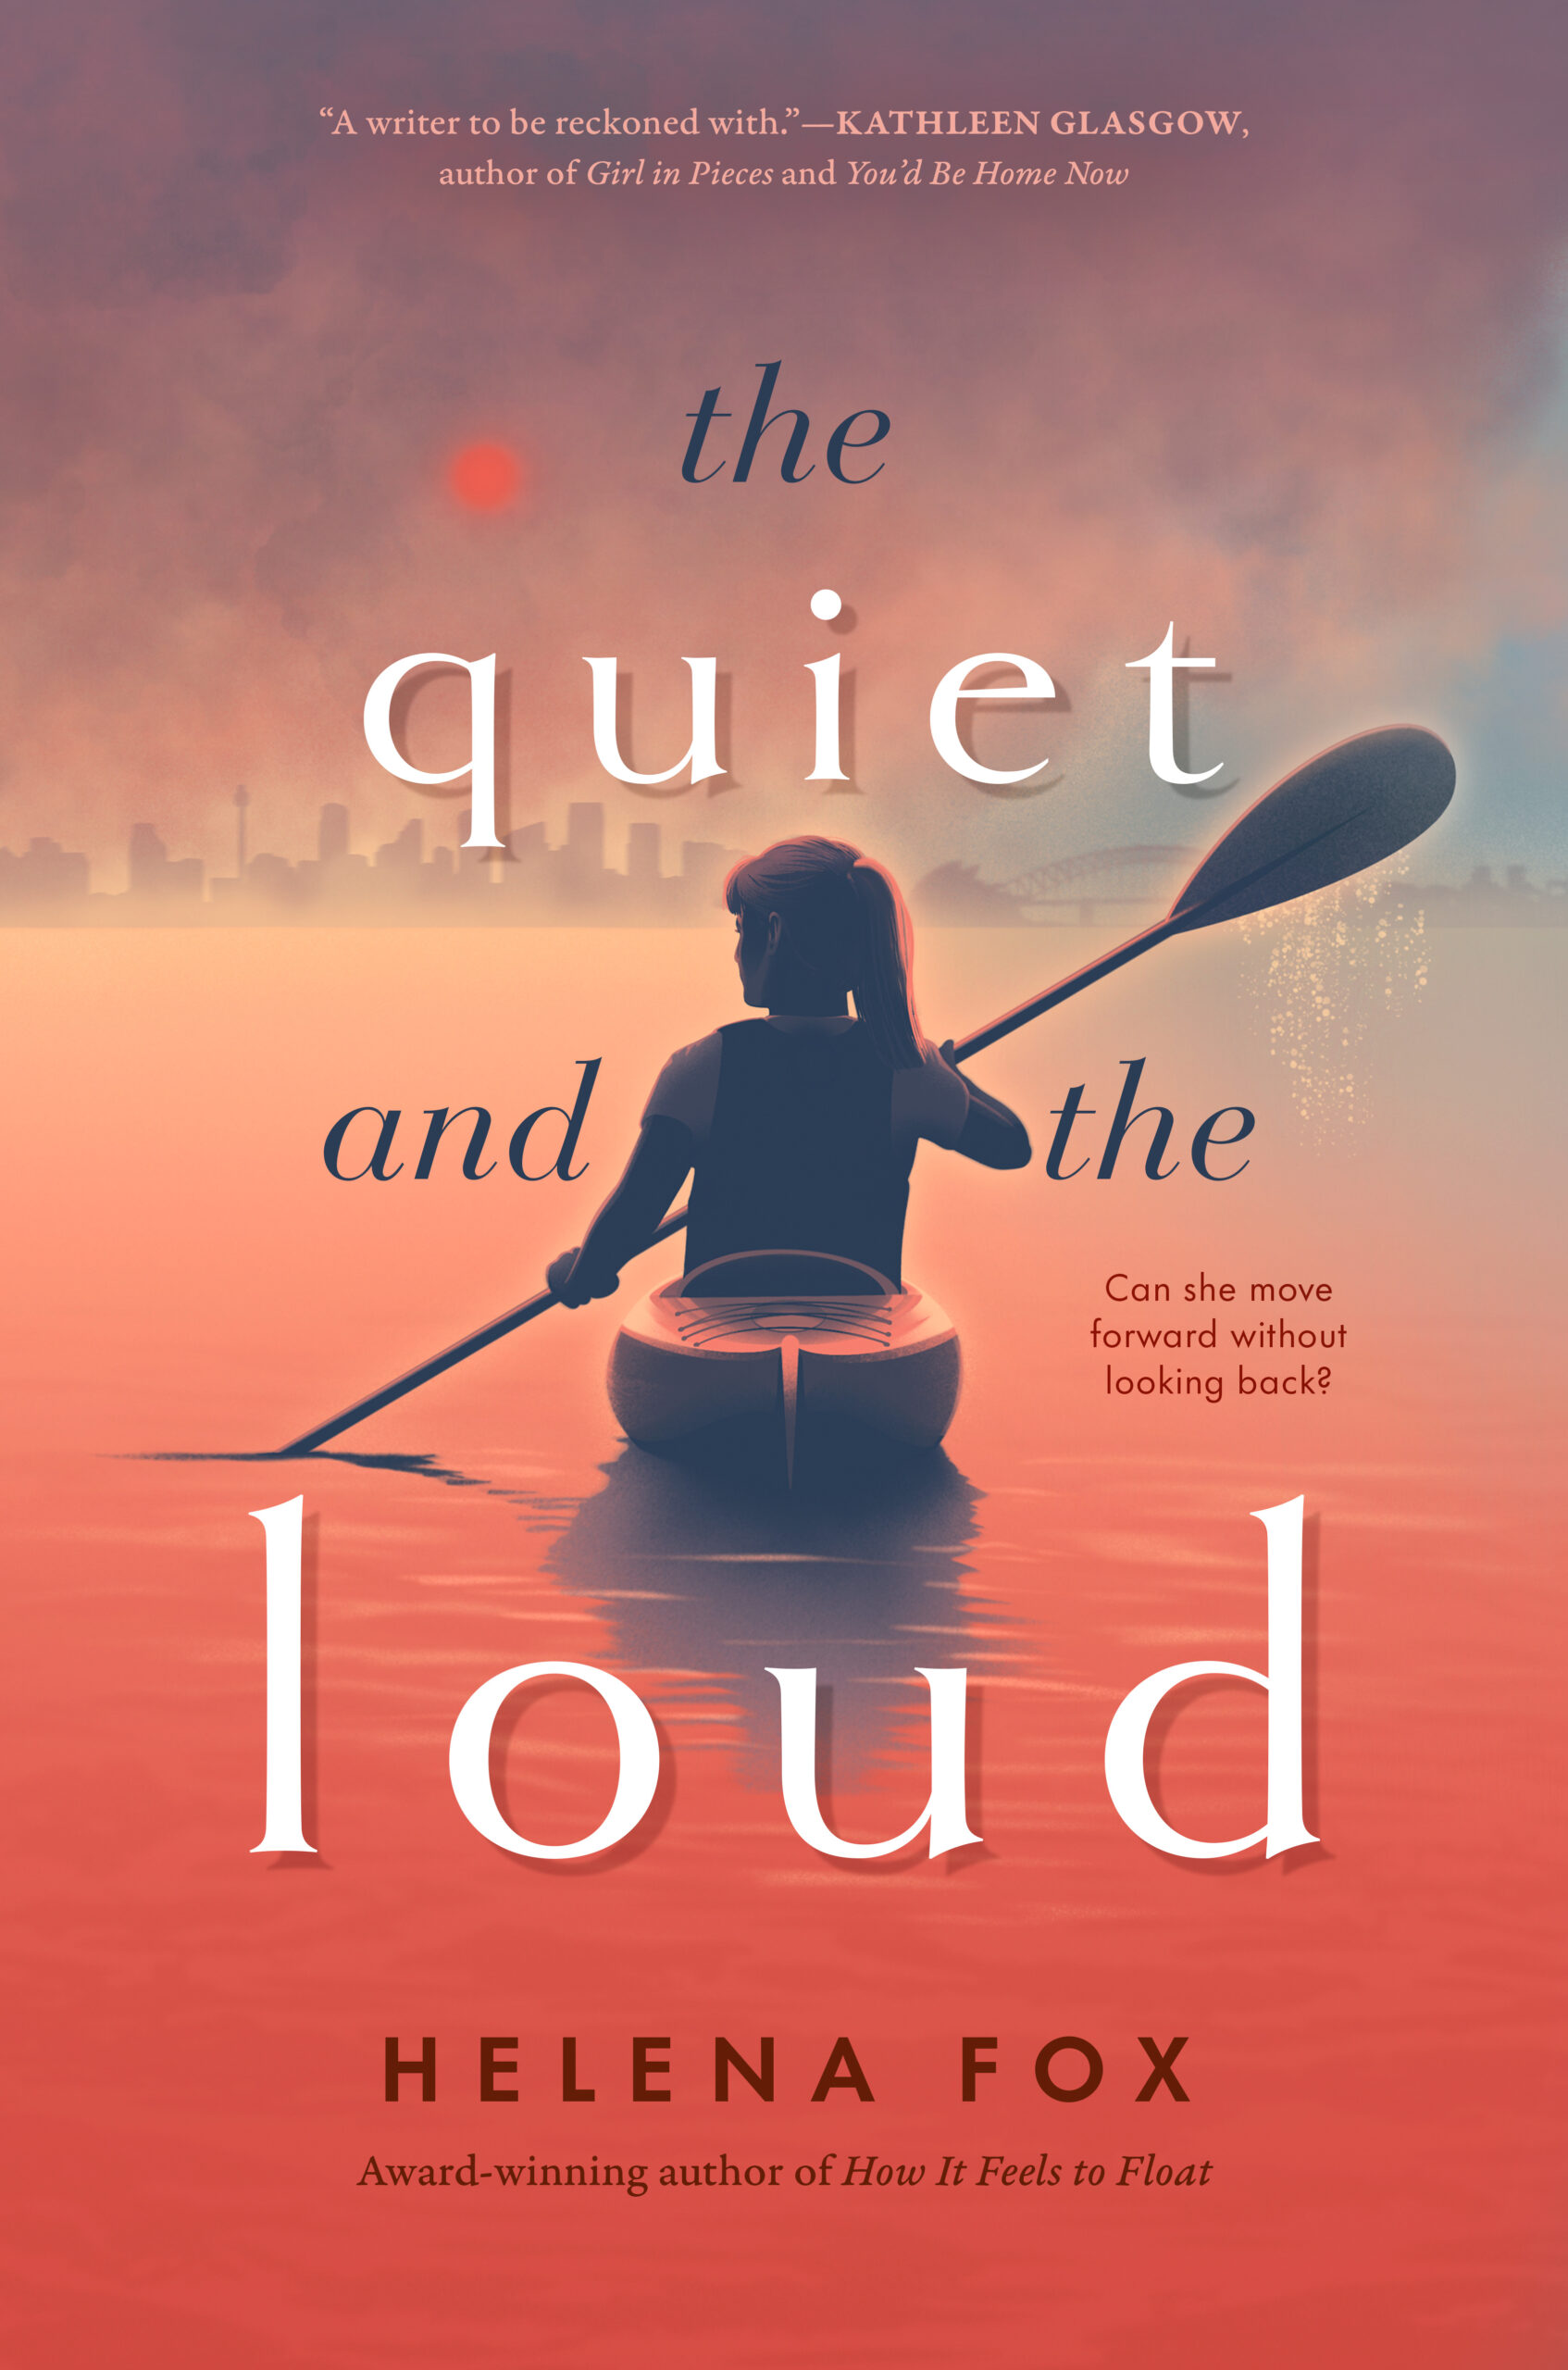 Writing Quietly (…While Surrounded by Loud Things), a guest post by Helena Fox